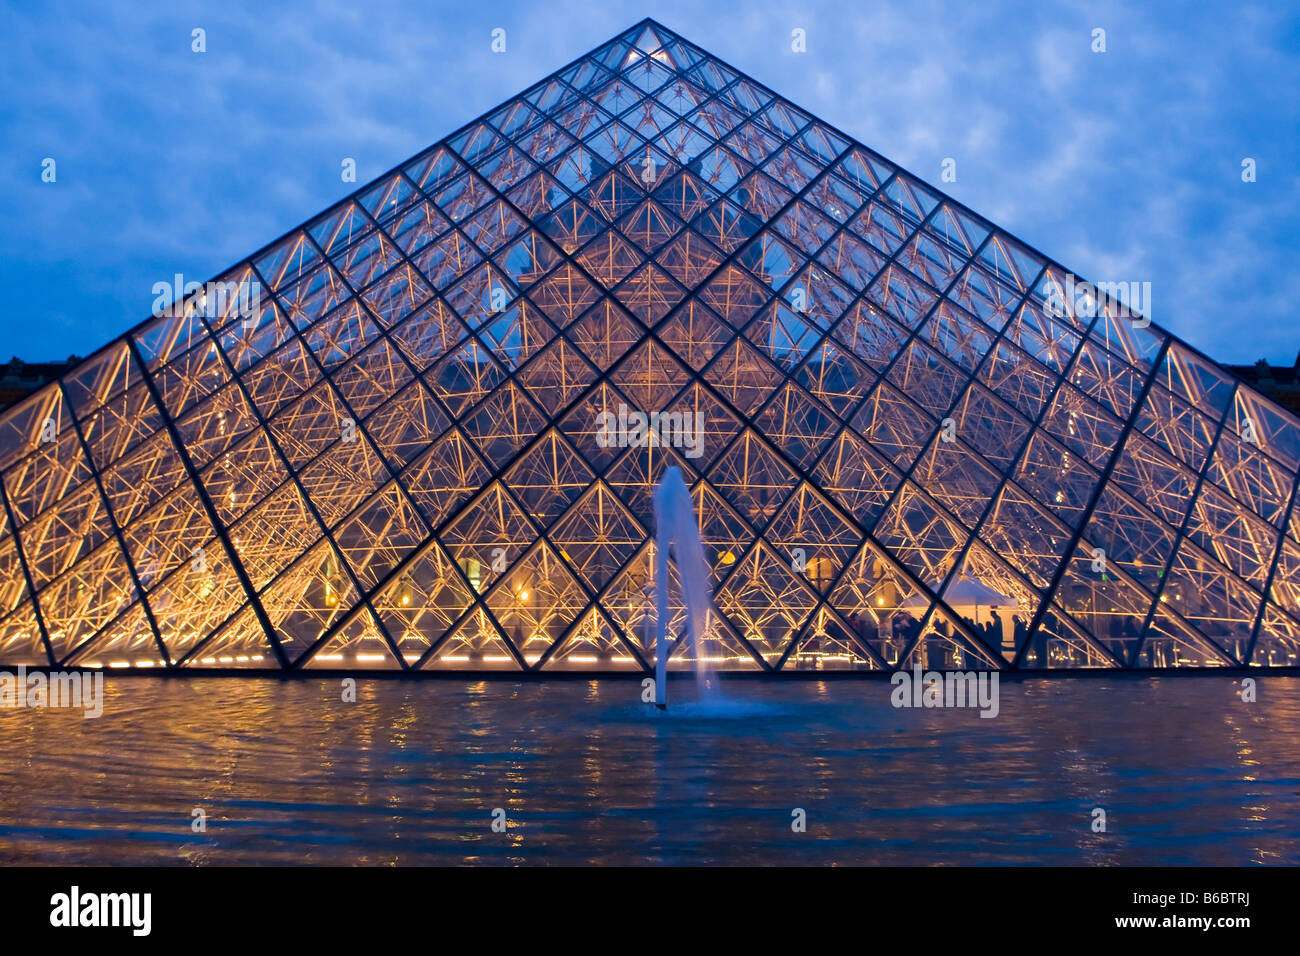 The Richelieu wing of the Louvre through its glass pyramid entrance, Paris Stock Photo